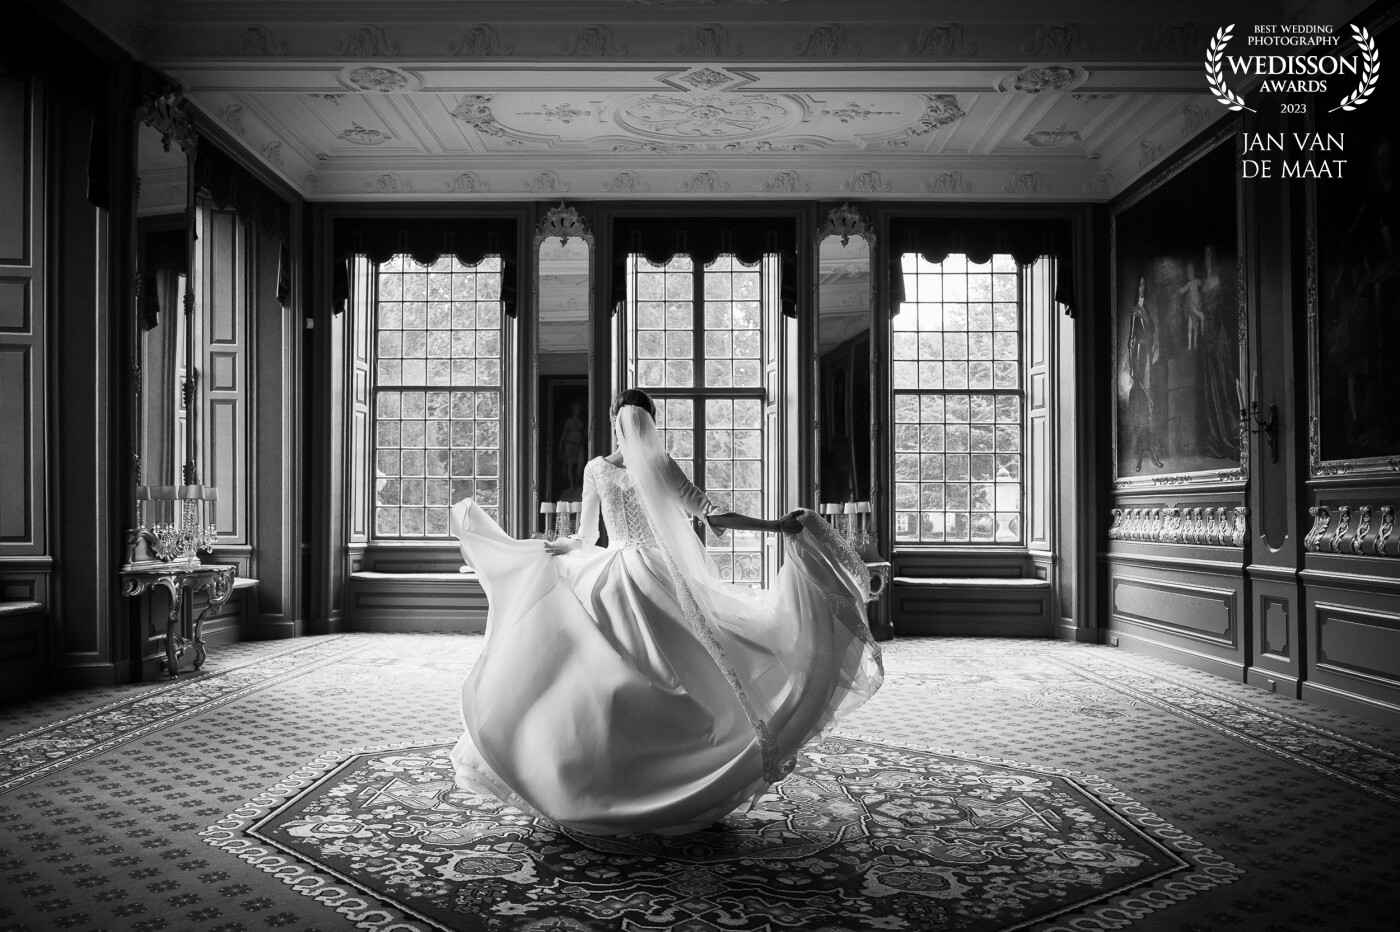 Some motion in a bridal image is always great to capture! The light was just daylight through the windows from the right.